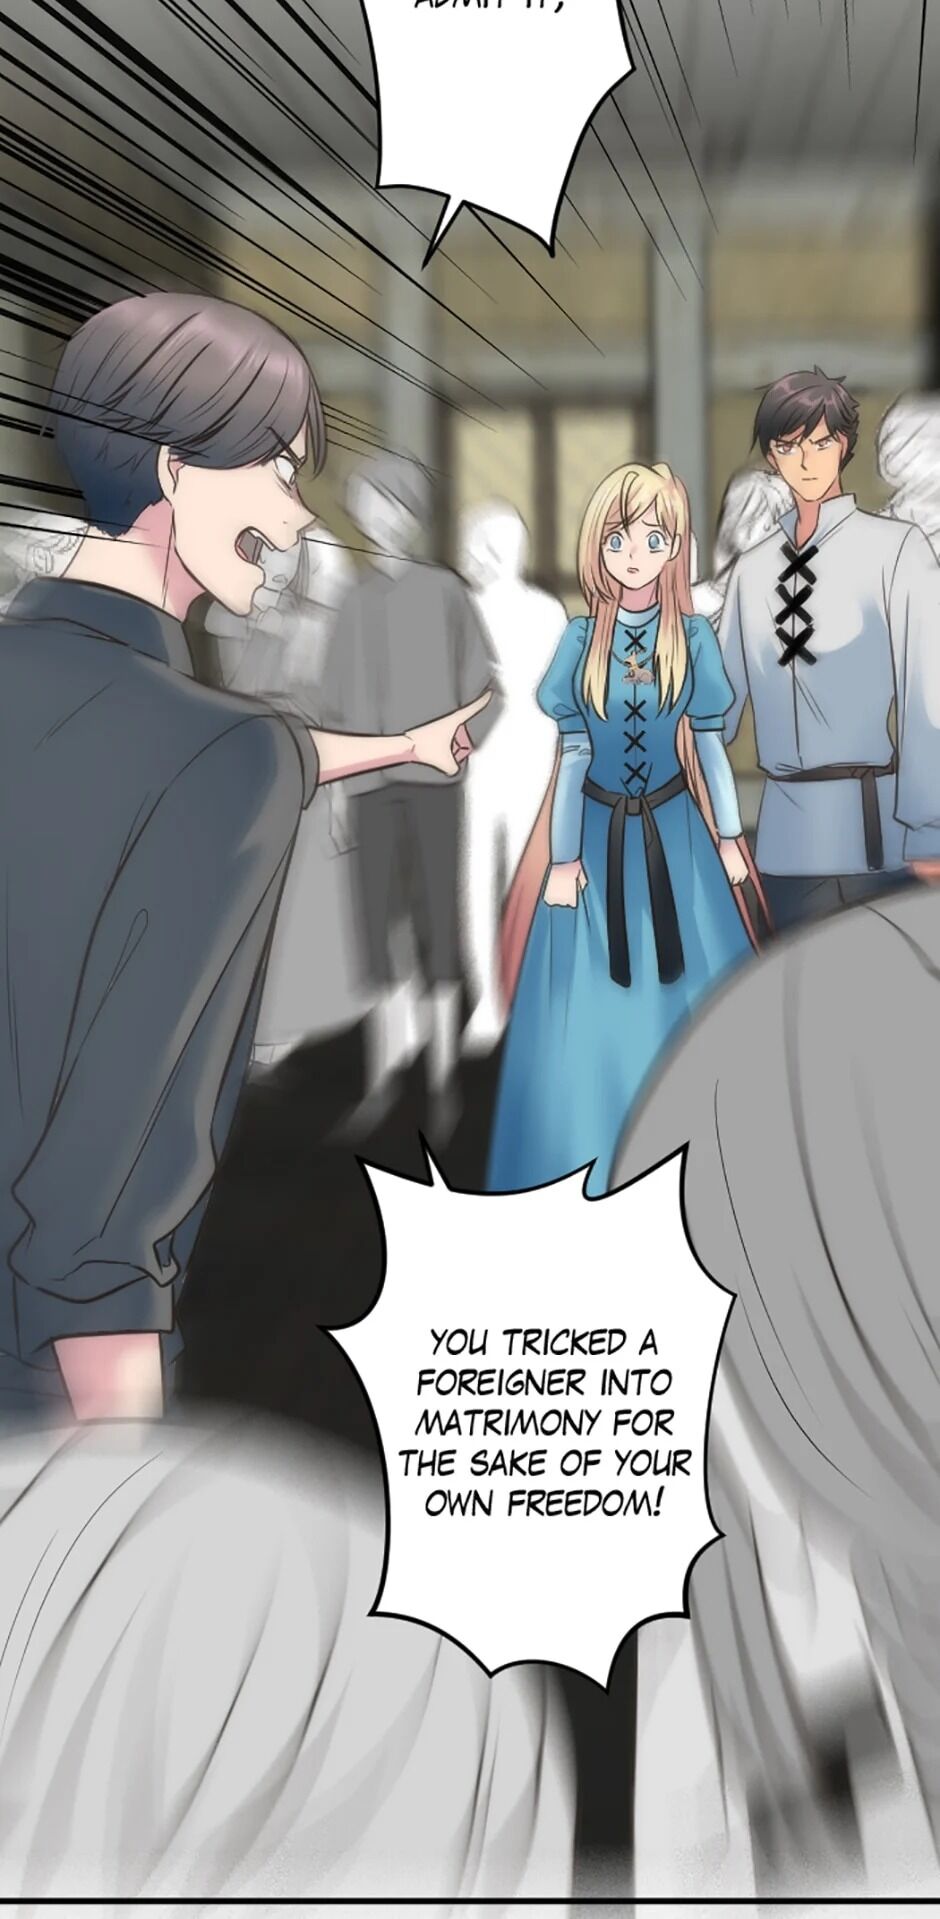 The Dragon Prince’s Bride chapter 36